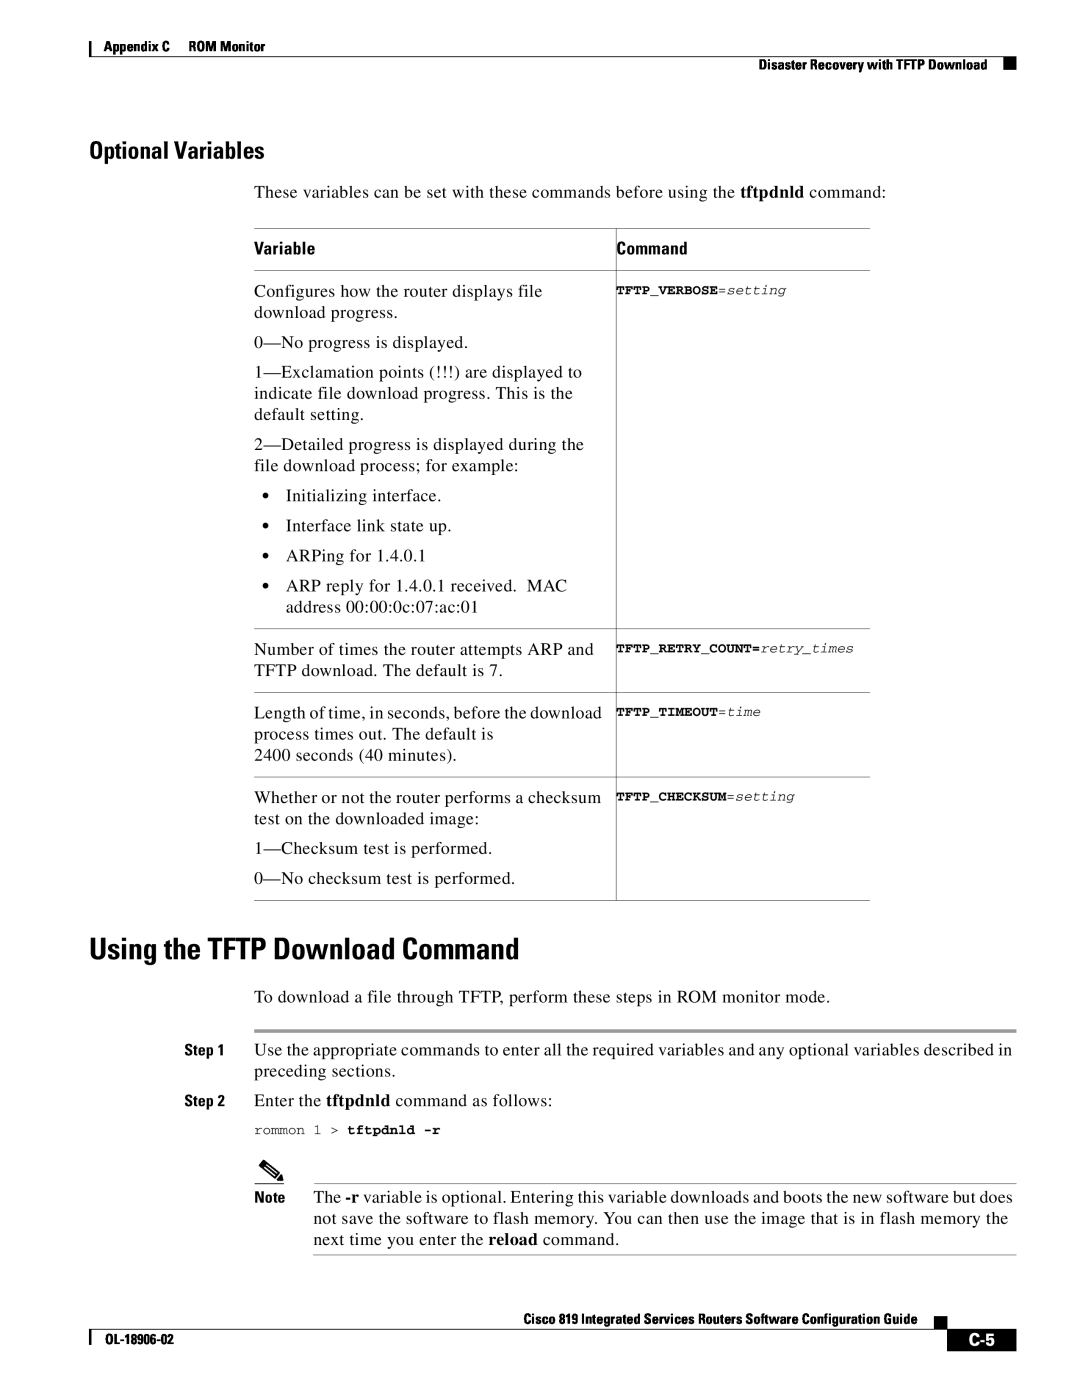 Cisco Systems C819HG4GVK9, C819GUK9 manual Using the TFTP Download Command, Optional Variables 